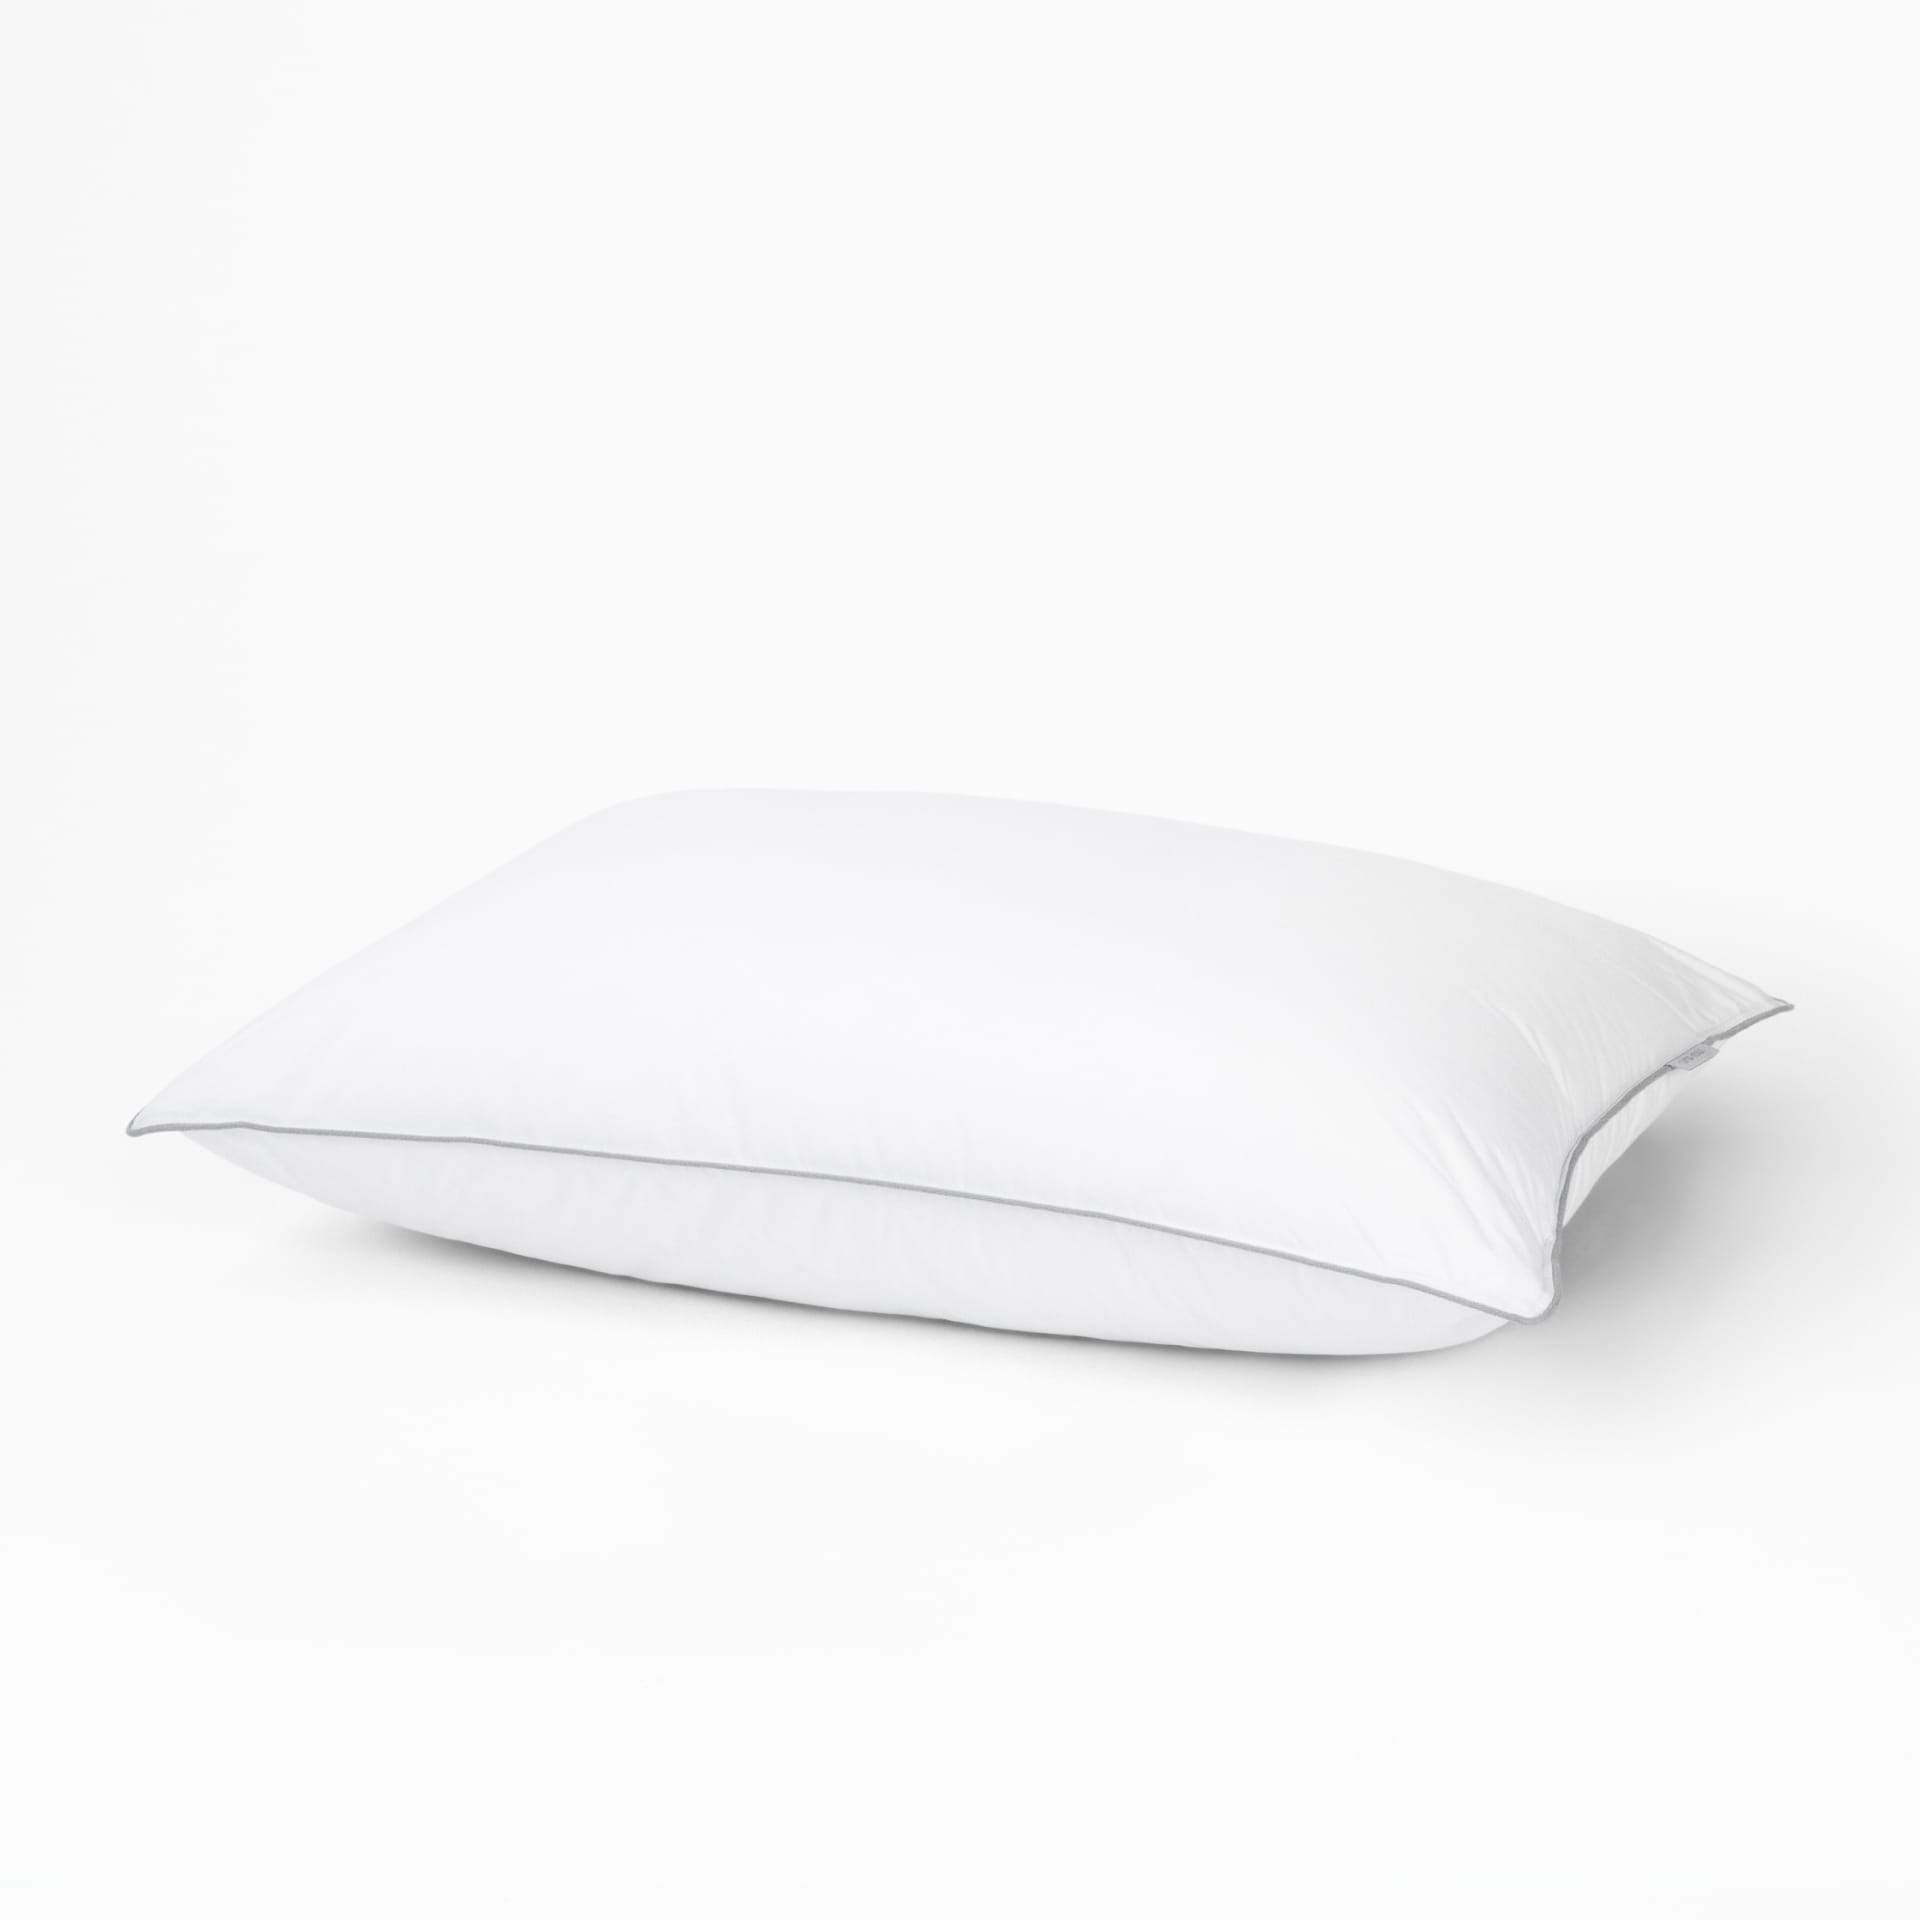 https://ak1.ostkcdn.com/images/products/is/images/direct/2abffcf8fa6f20a3b2c618cc4a41742b93455967/Down-Alternative-Pillow-2-Pack---Standard.jpg